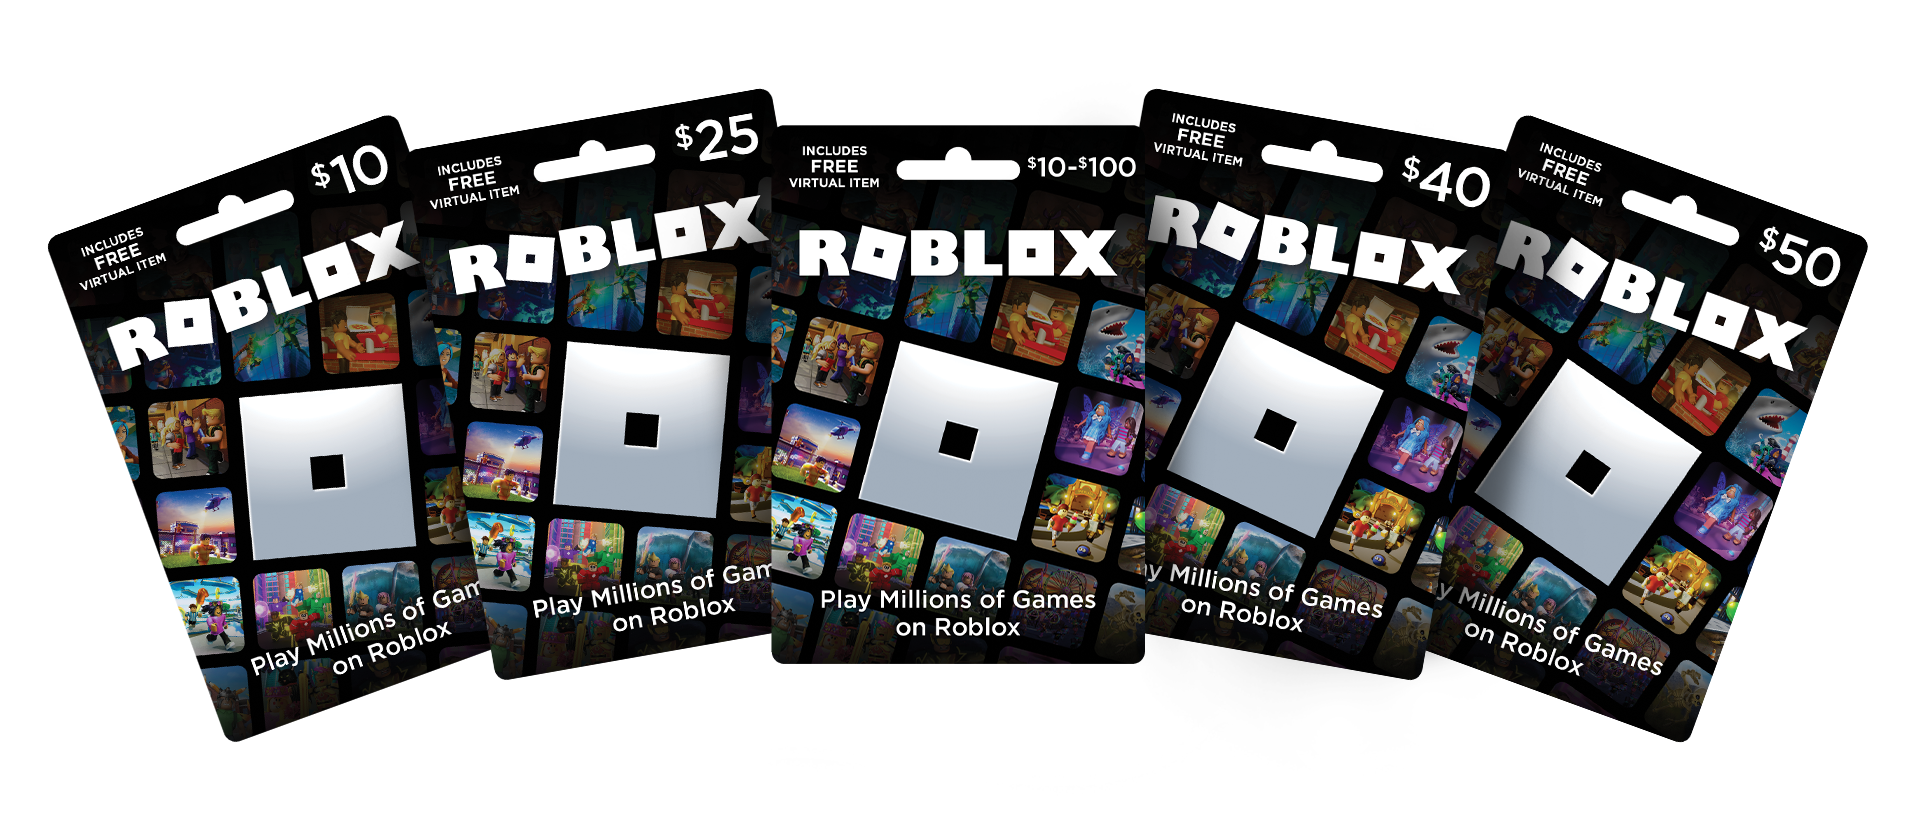 Roblox Card Roblox Wikia Fandom - free robux calc for rblox rbx station apps on google play